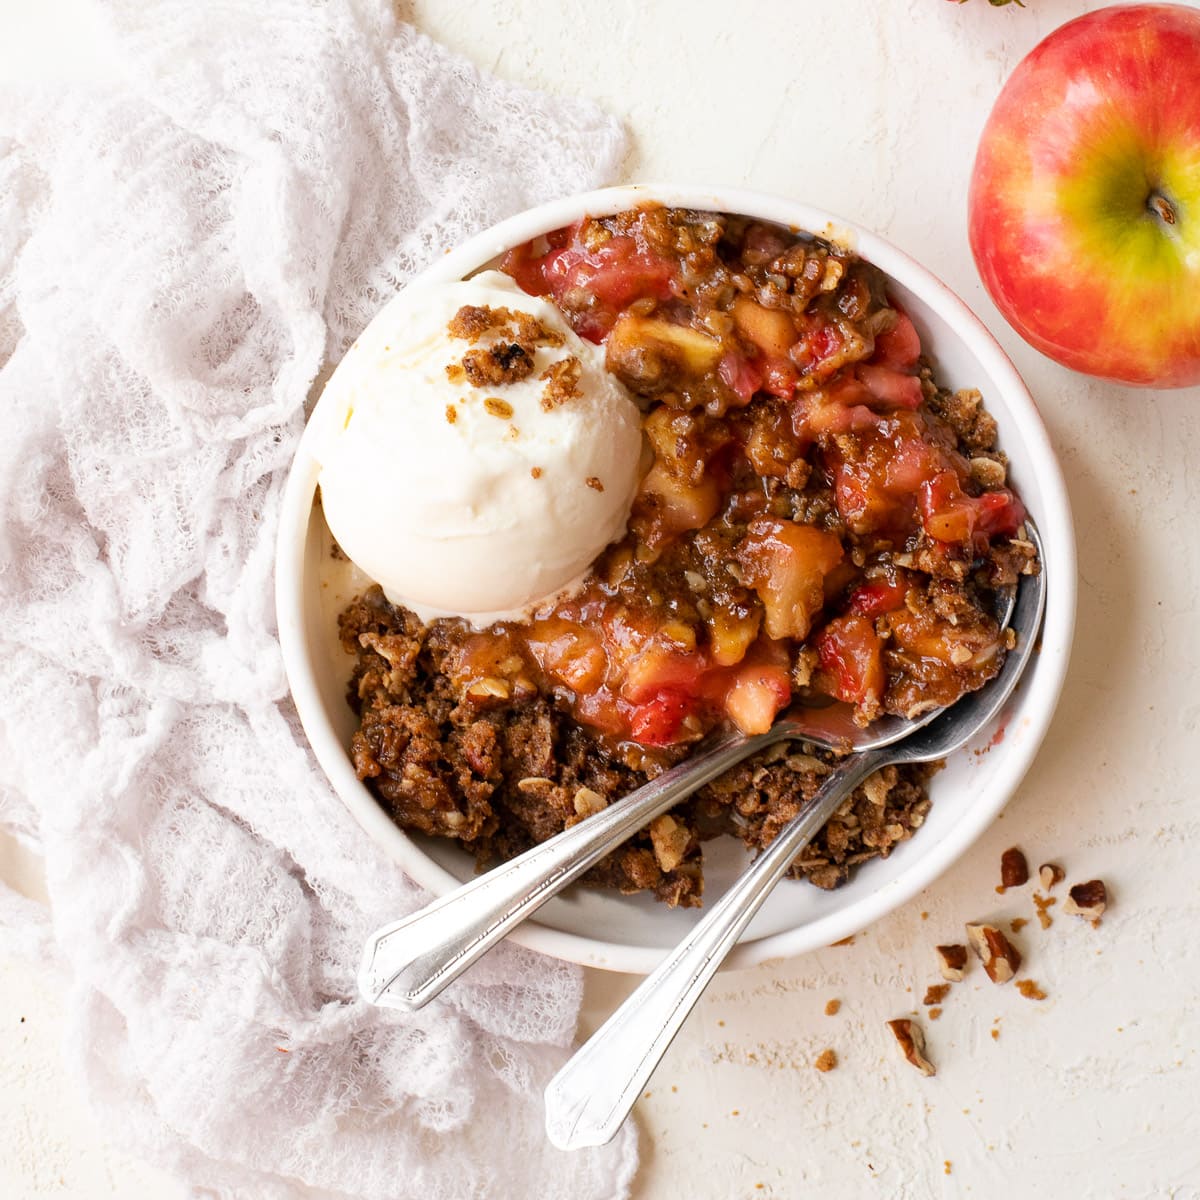 Strawberry Apple Crumble - a wam, nutty crumble that combines juicy summer berries with crisp fall apples in the best way possible. | www.brighteyedbaker.com